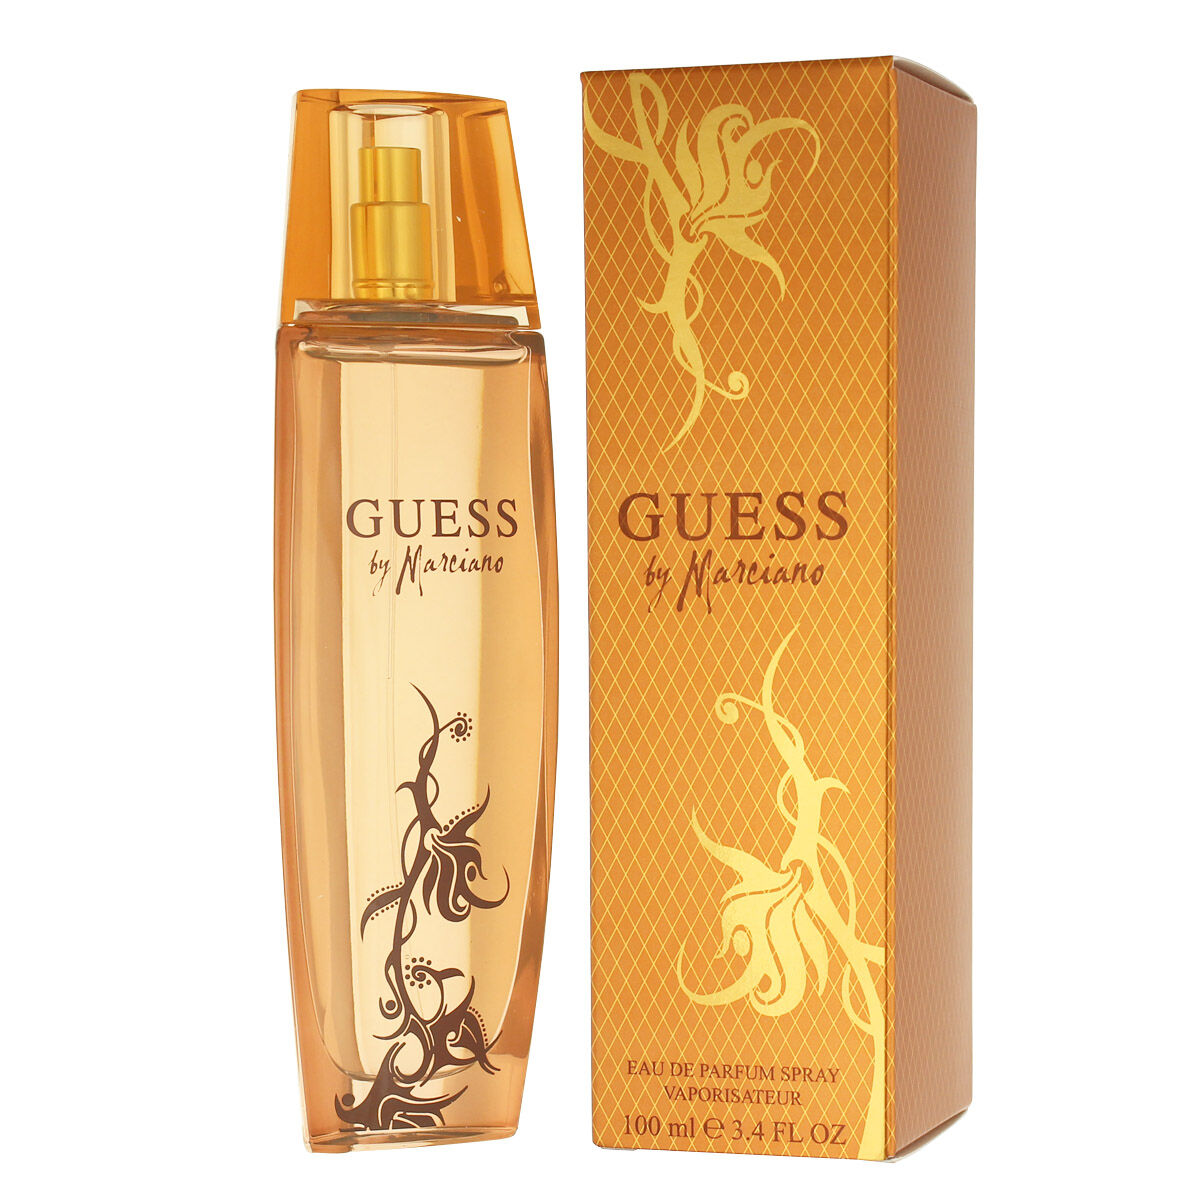 Parfum Femme Guess   EDP By Marciano (100 ml)